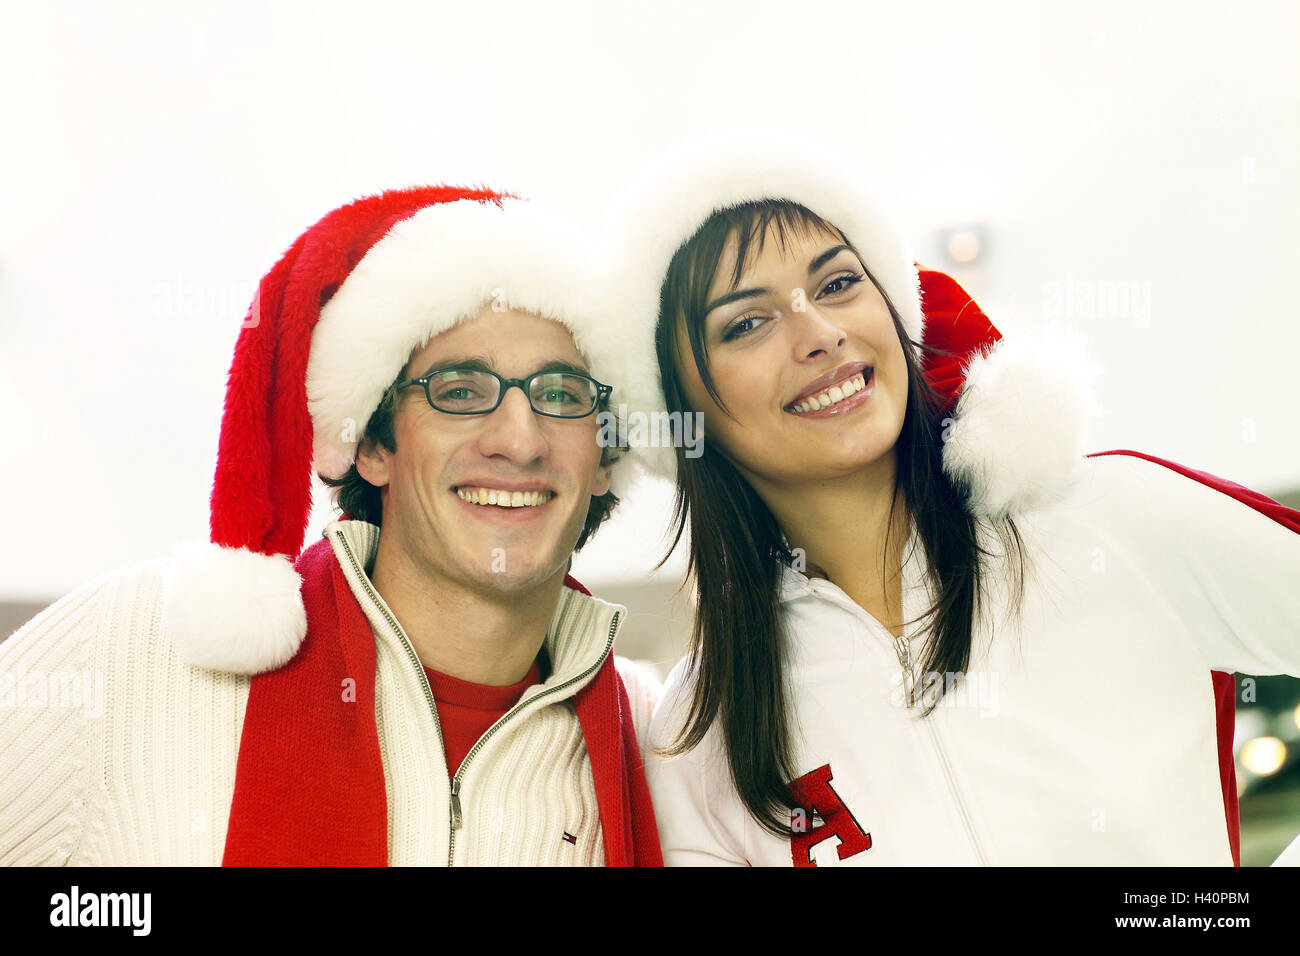 Shopping centre, couple, young, happy, Santa's hats, portrait, yule tide, Christmas period, department store, cheerfulness, joy, together, embrace, affection, happy, falls in love, love, partnership, friendship, glasses, wearers glasses, caps Stock Photo